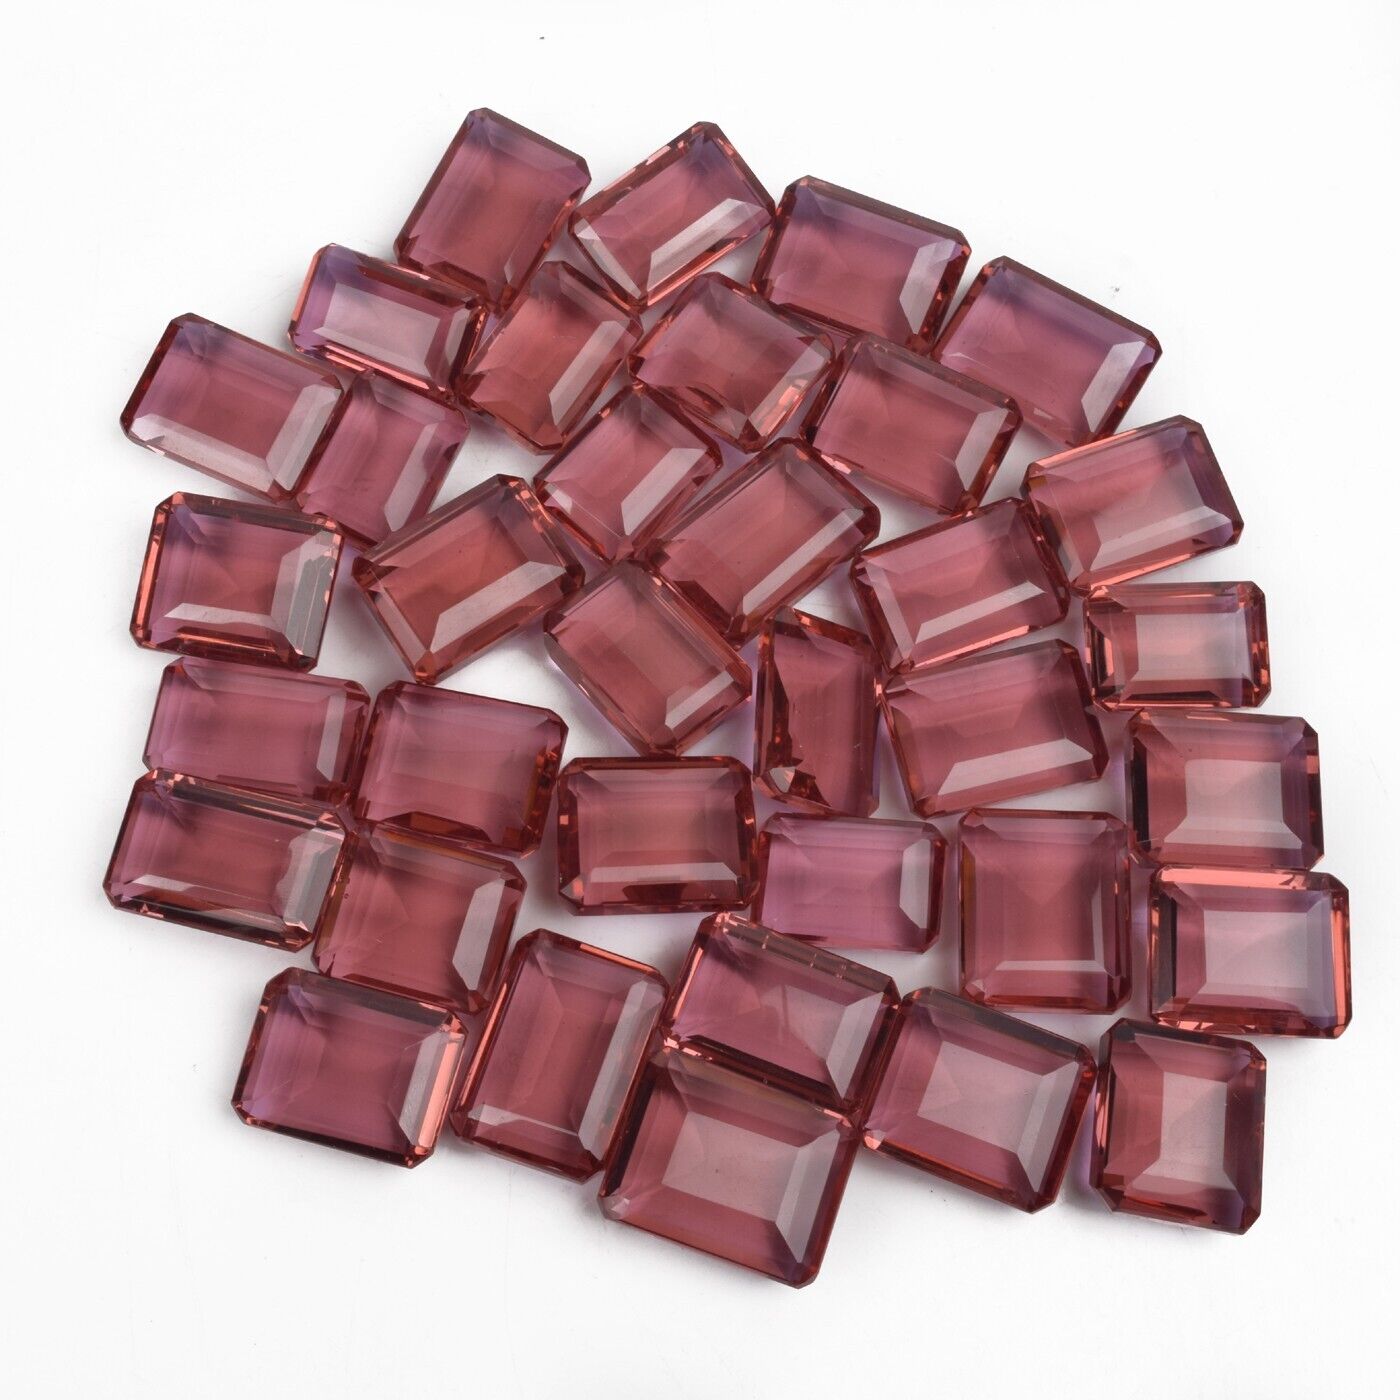 Lab-Created Color-Changing Alexandrite Emerald Cut Loose Gem Lot 350ct/4-5 Pcs Unbranded